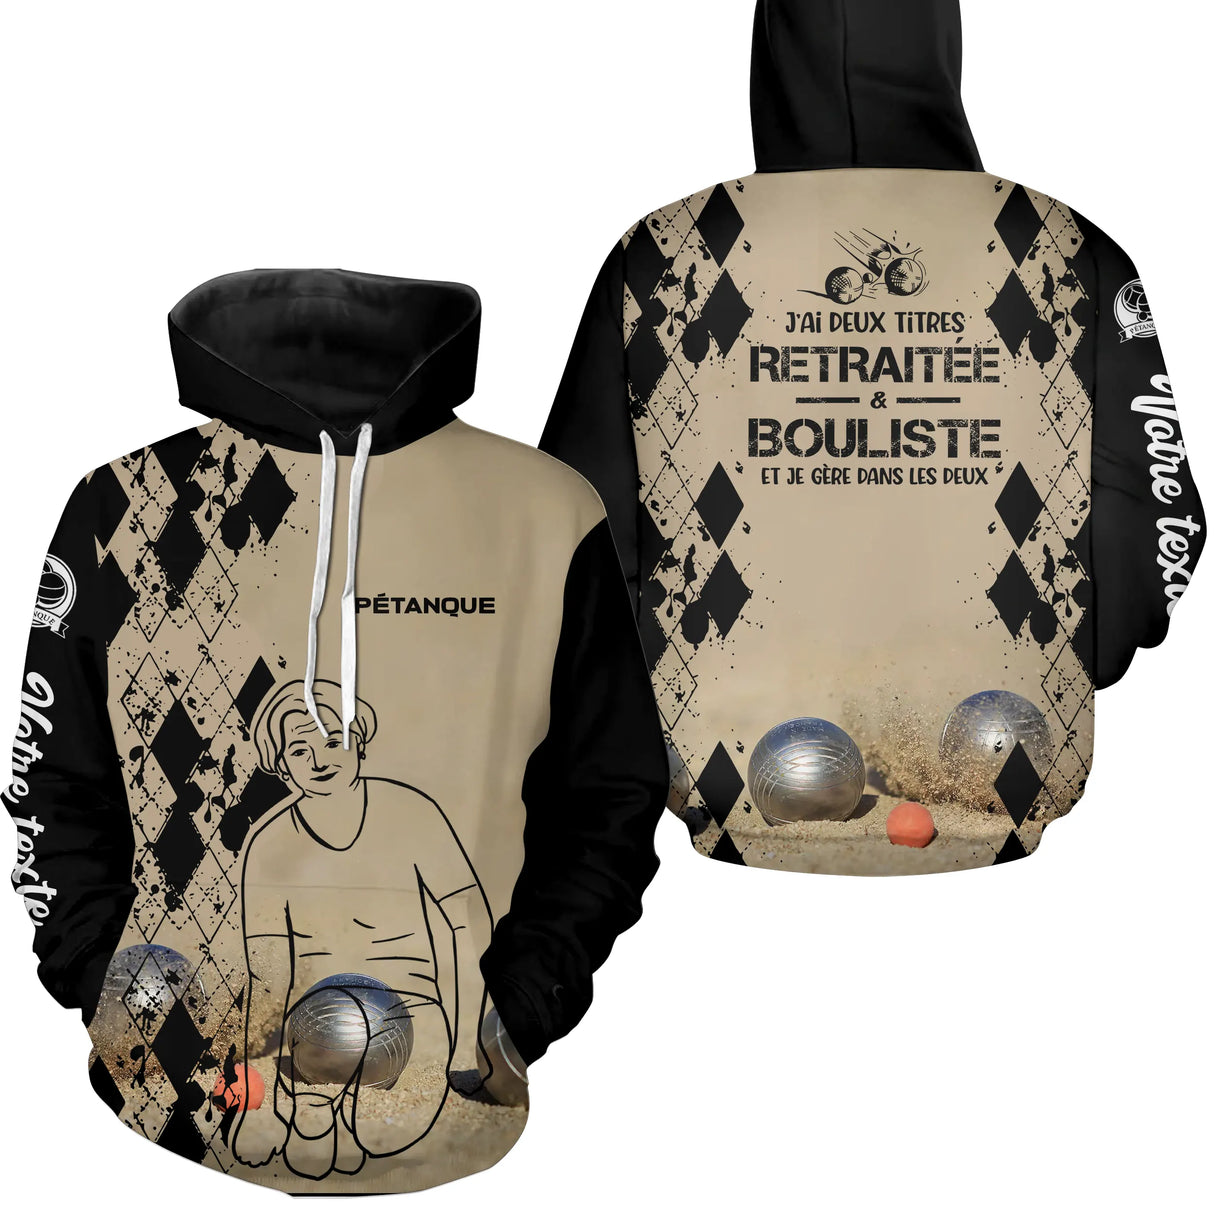 Women's Hooded Sweatshirt, Personalized Humorous Boule Player Gift, I Have Two Titles Retired and Boule Player - CT21102303